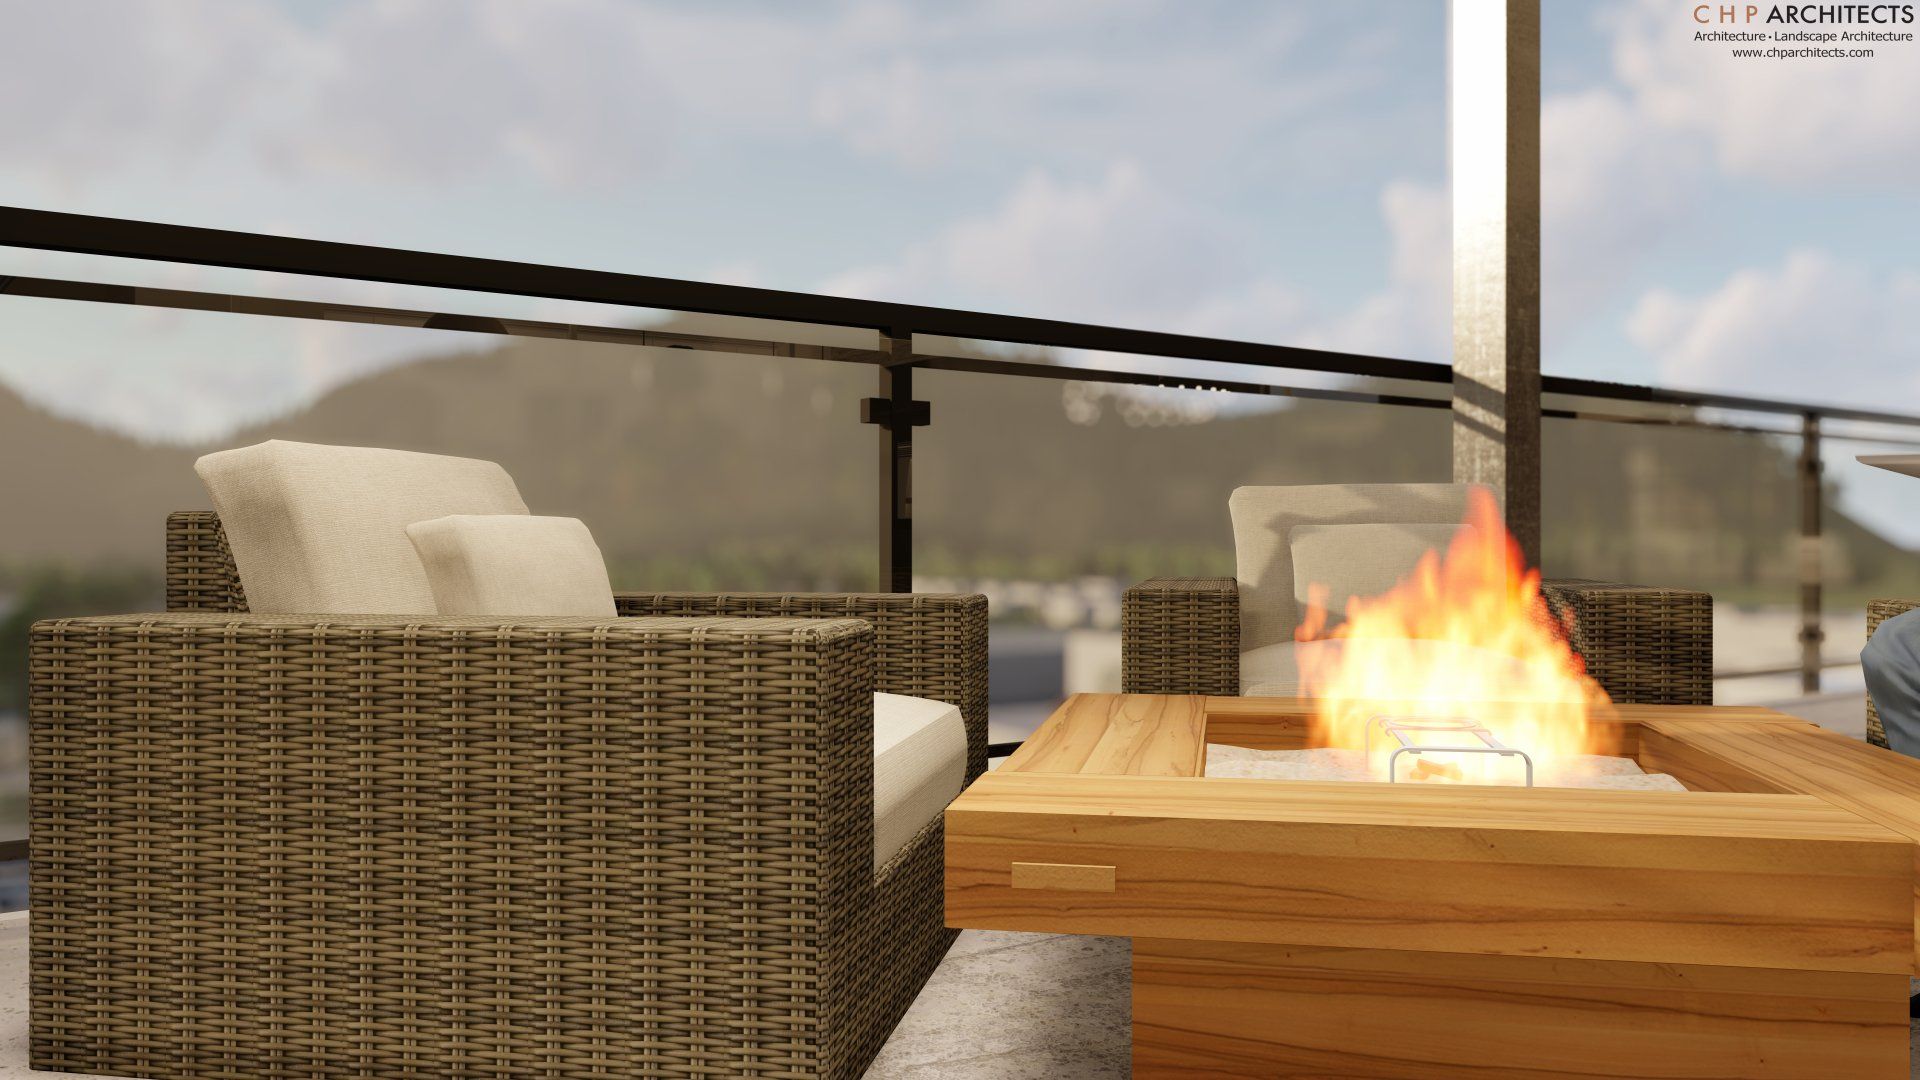 Fireplace in The Skynest's Luxury condos